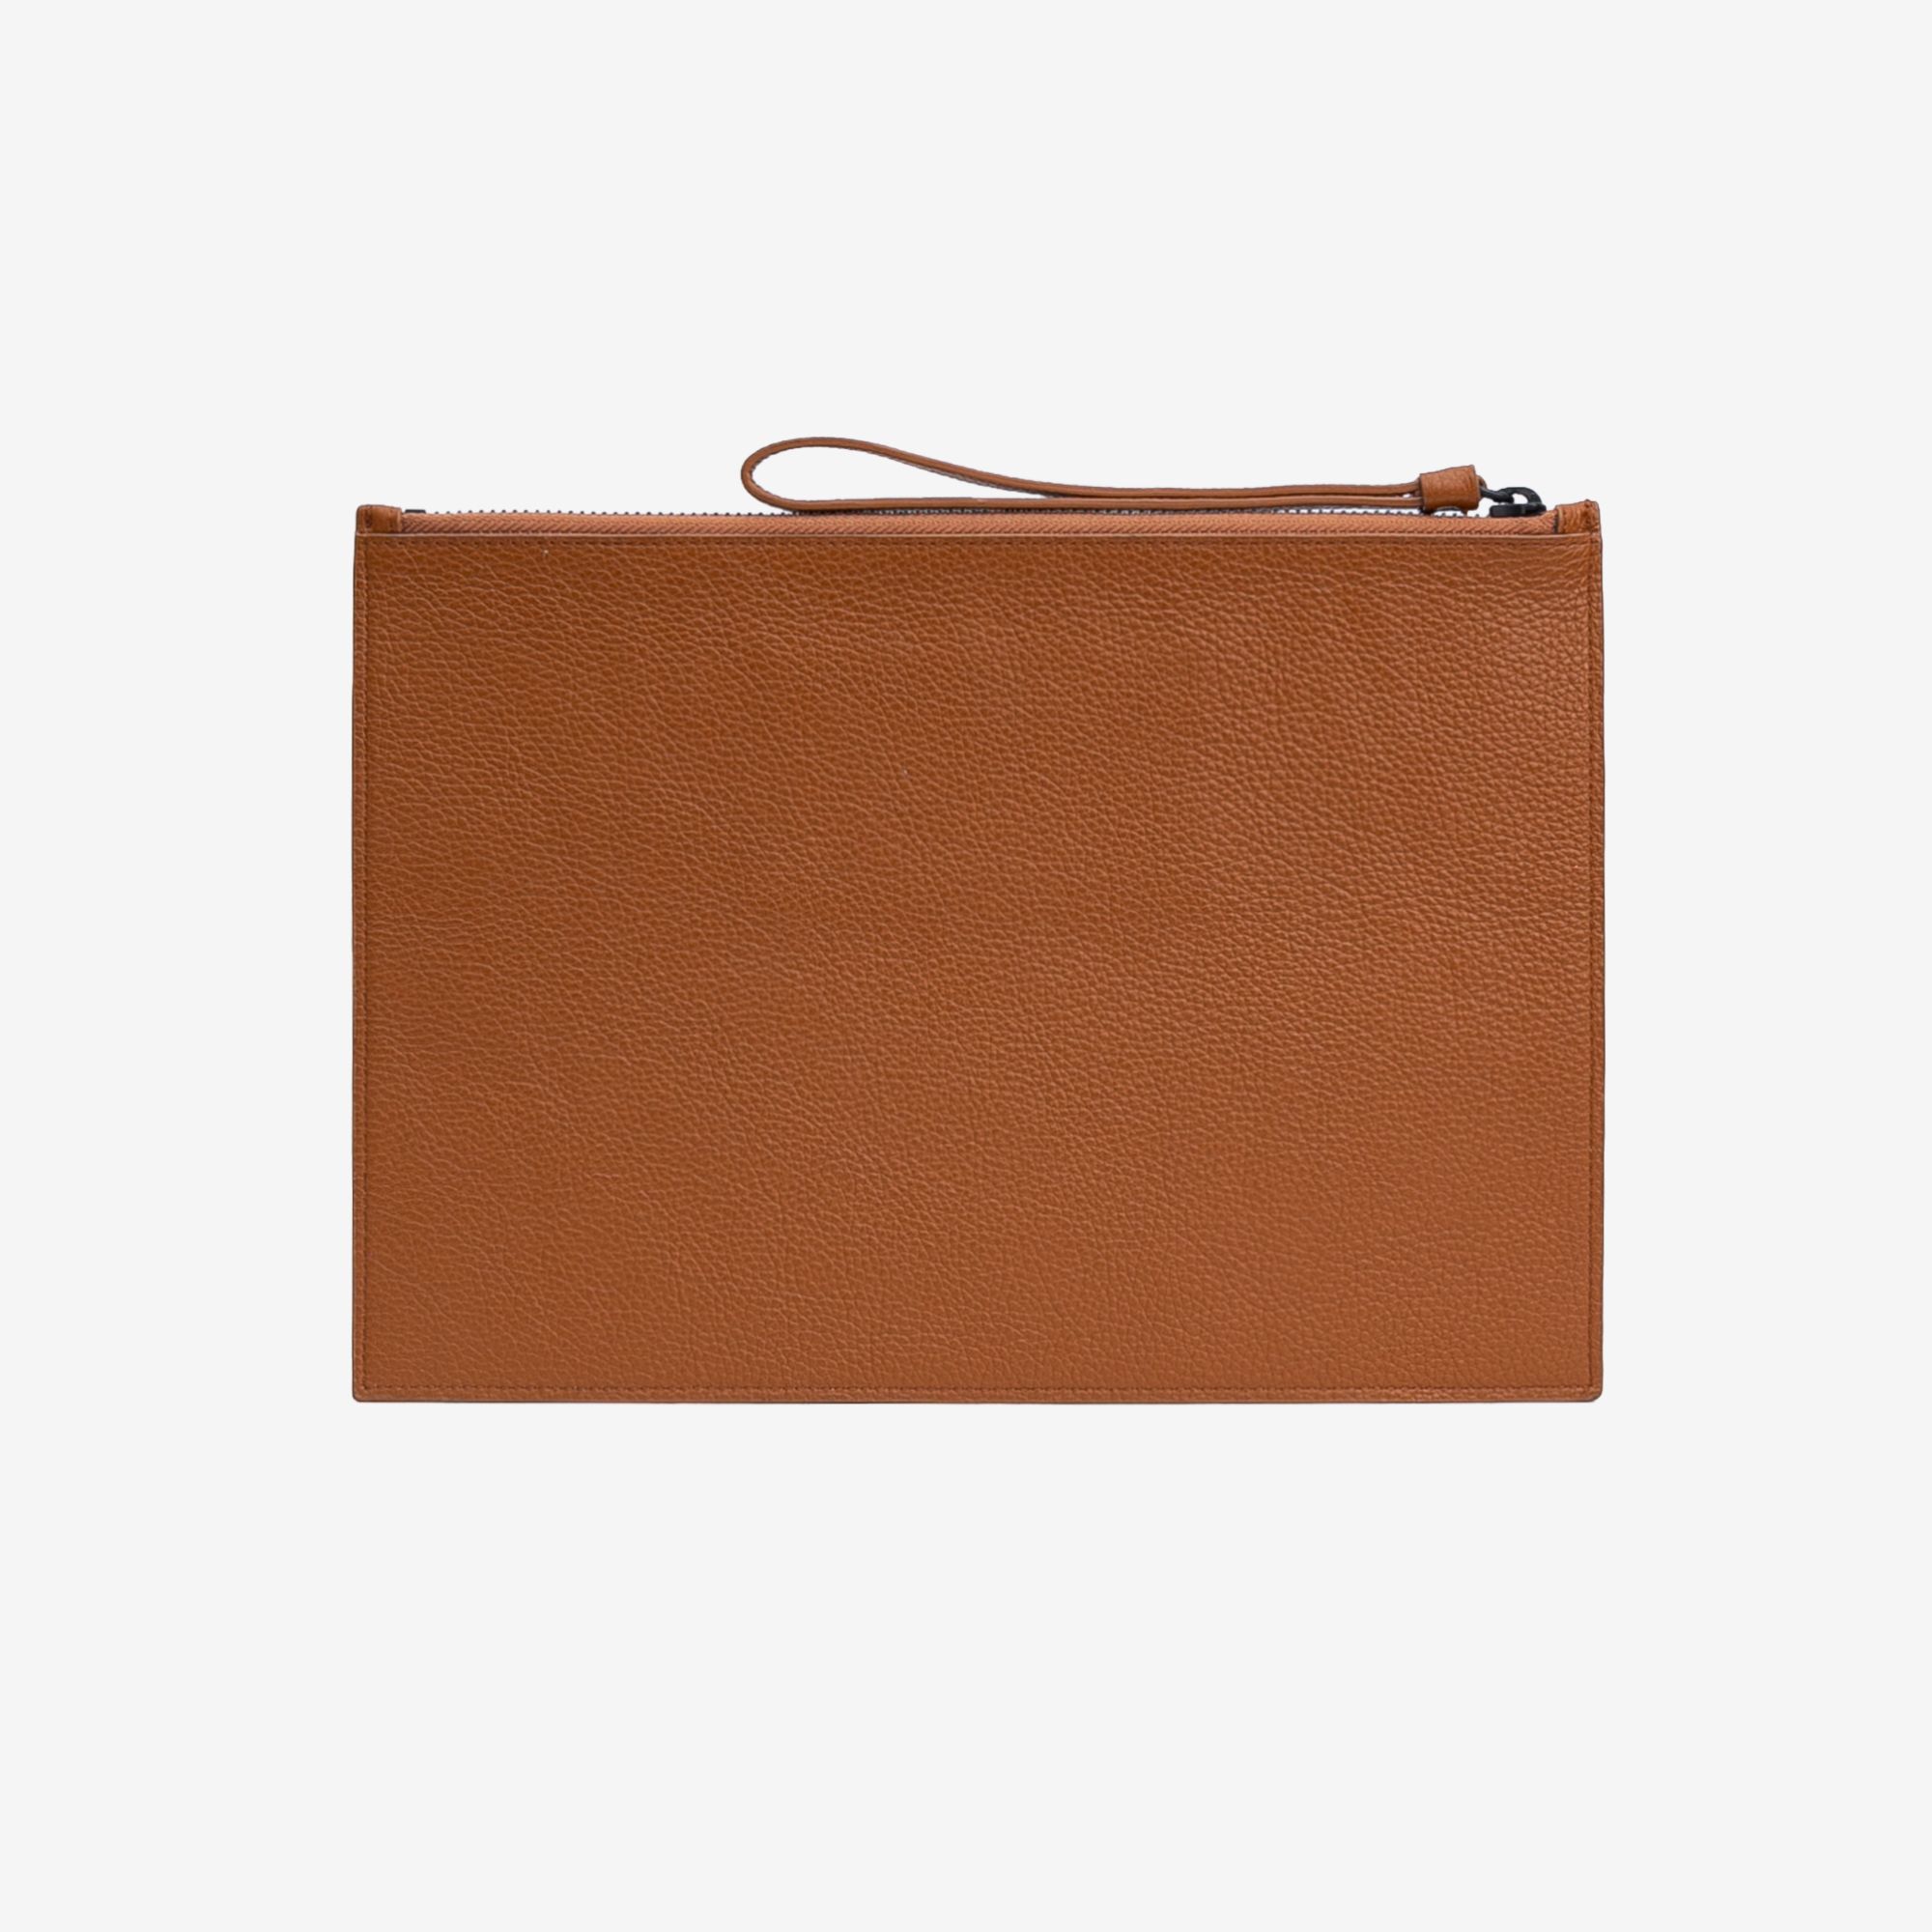  KENZO Logo Large Leather Clutch - Brown 